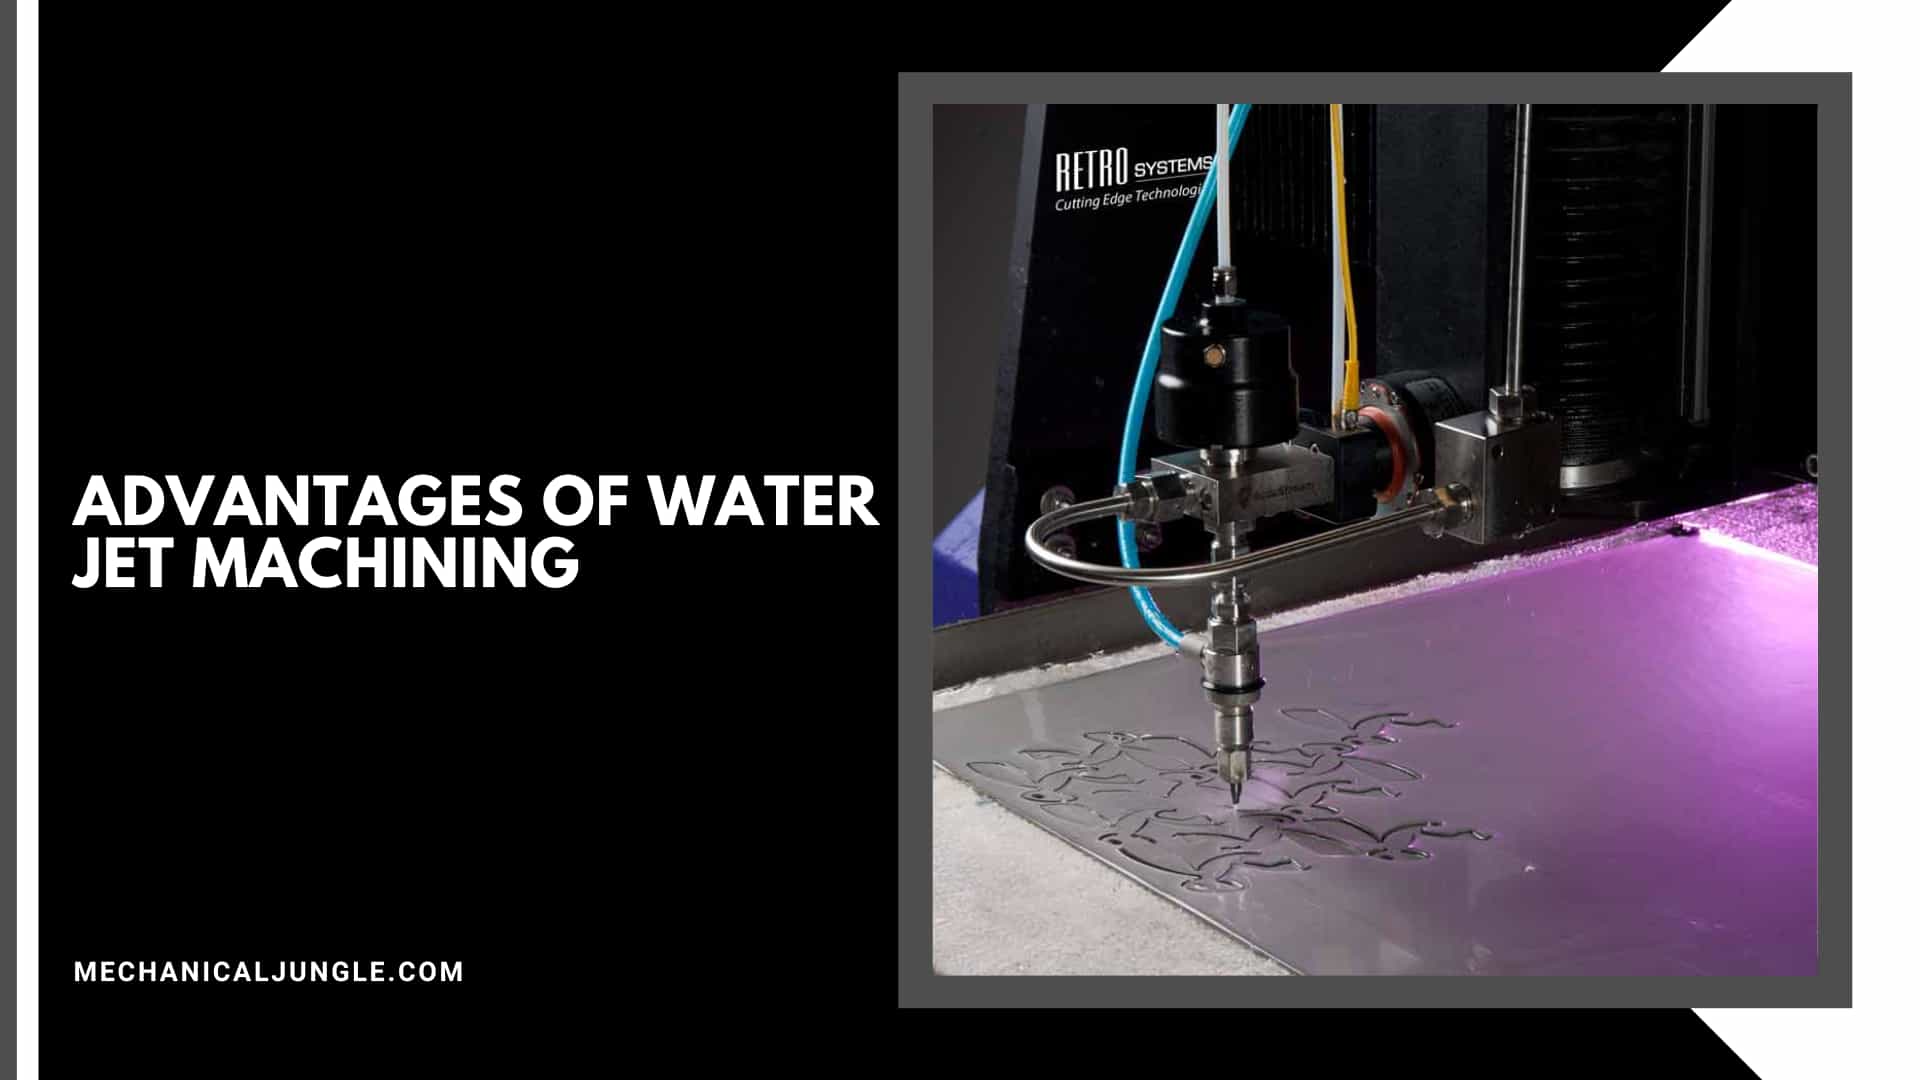 Advantages of Water Jet Machining